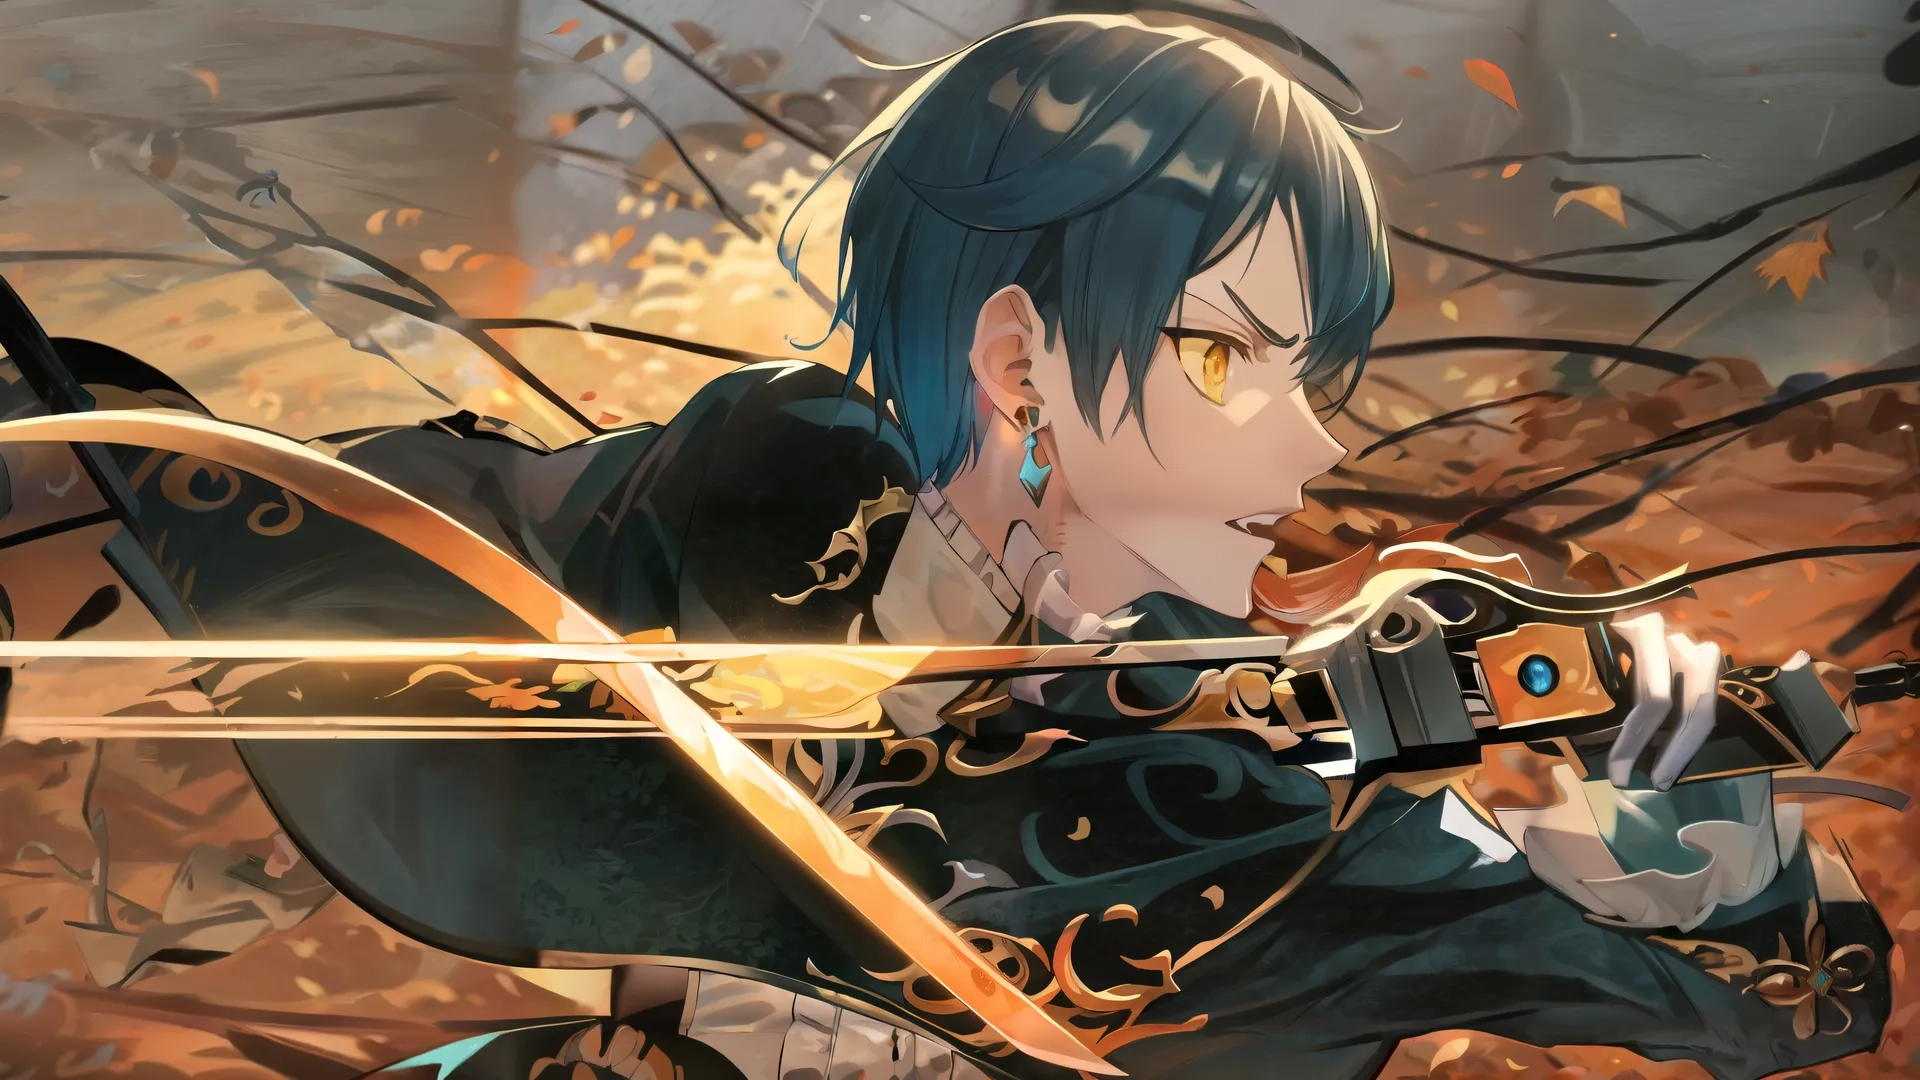 this character appears to be playing archery in this series of anime pictures, the aiming is really interesting and very well done and looks good
